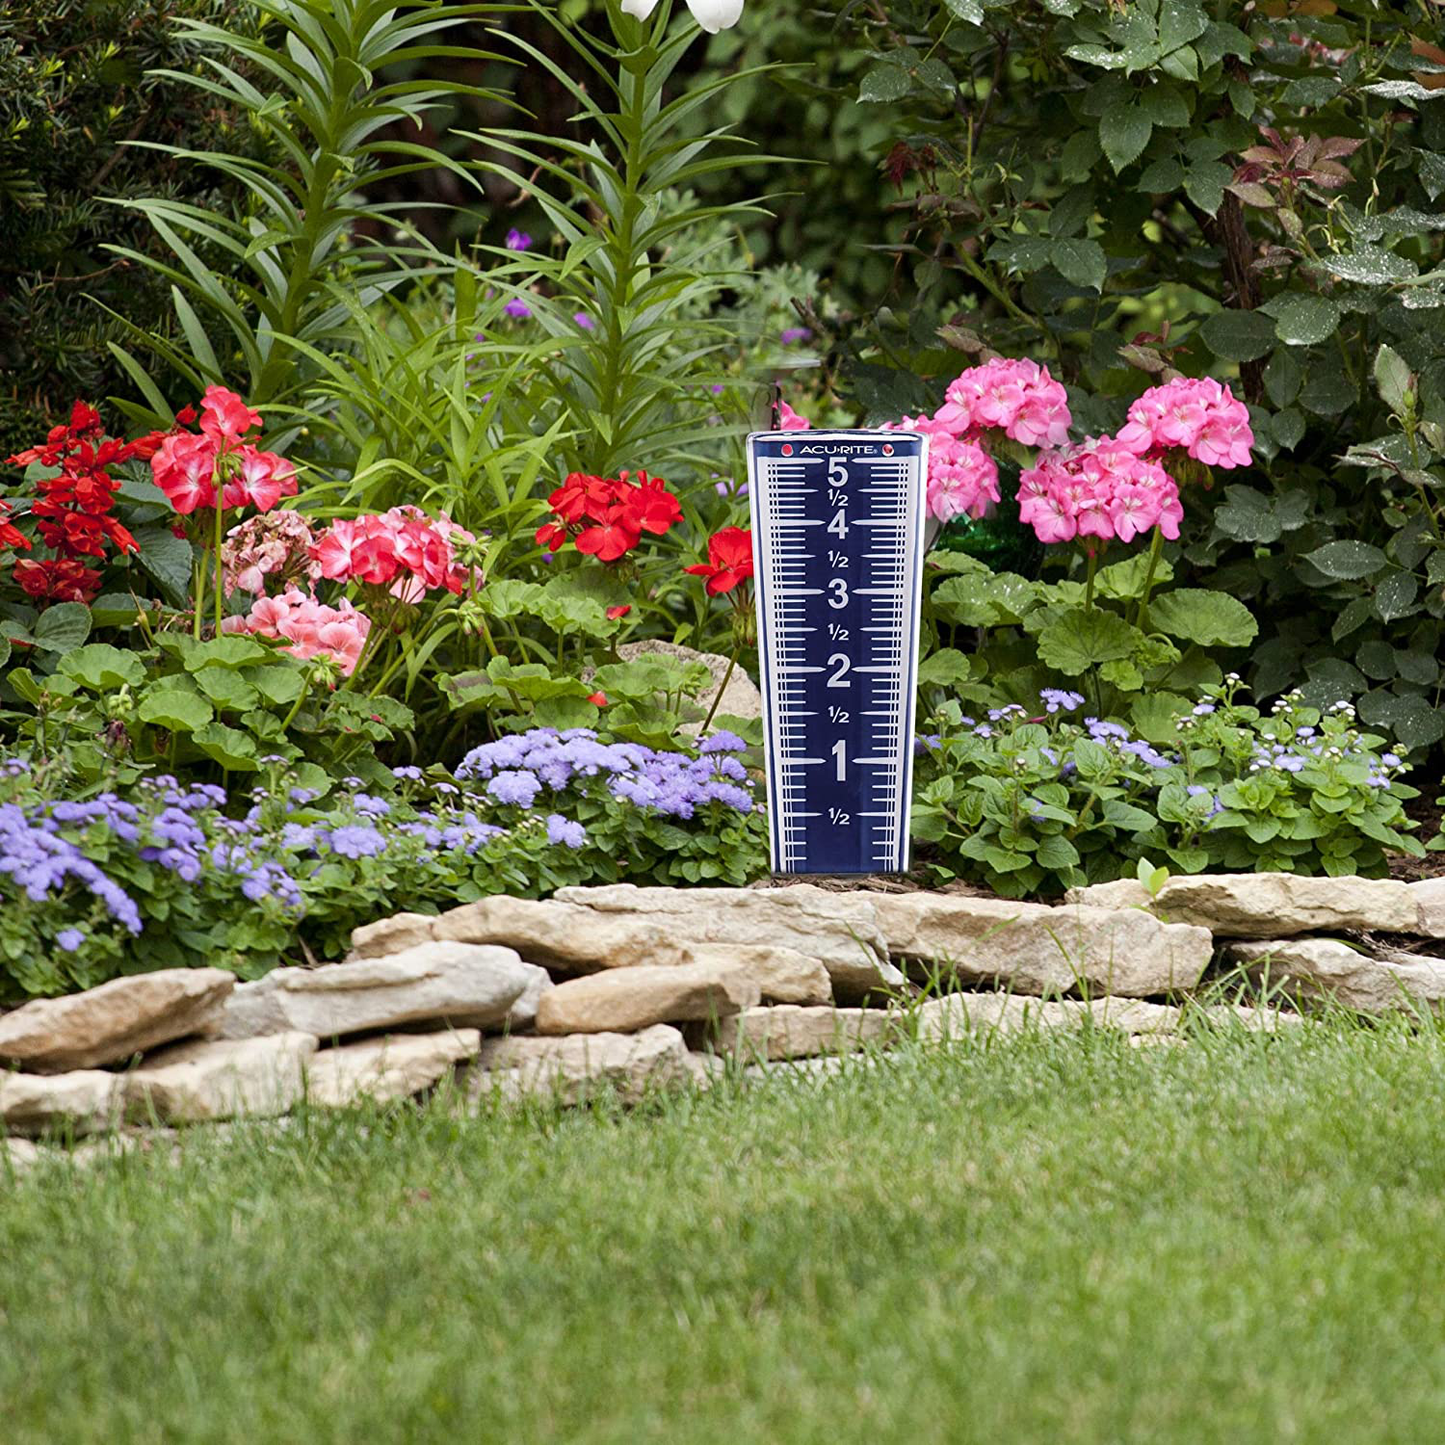 AcuRite 00850A2 5-Inch Capacity Easy-Read Magnifying Rain Gauge, Blue,12.5-inch